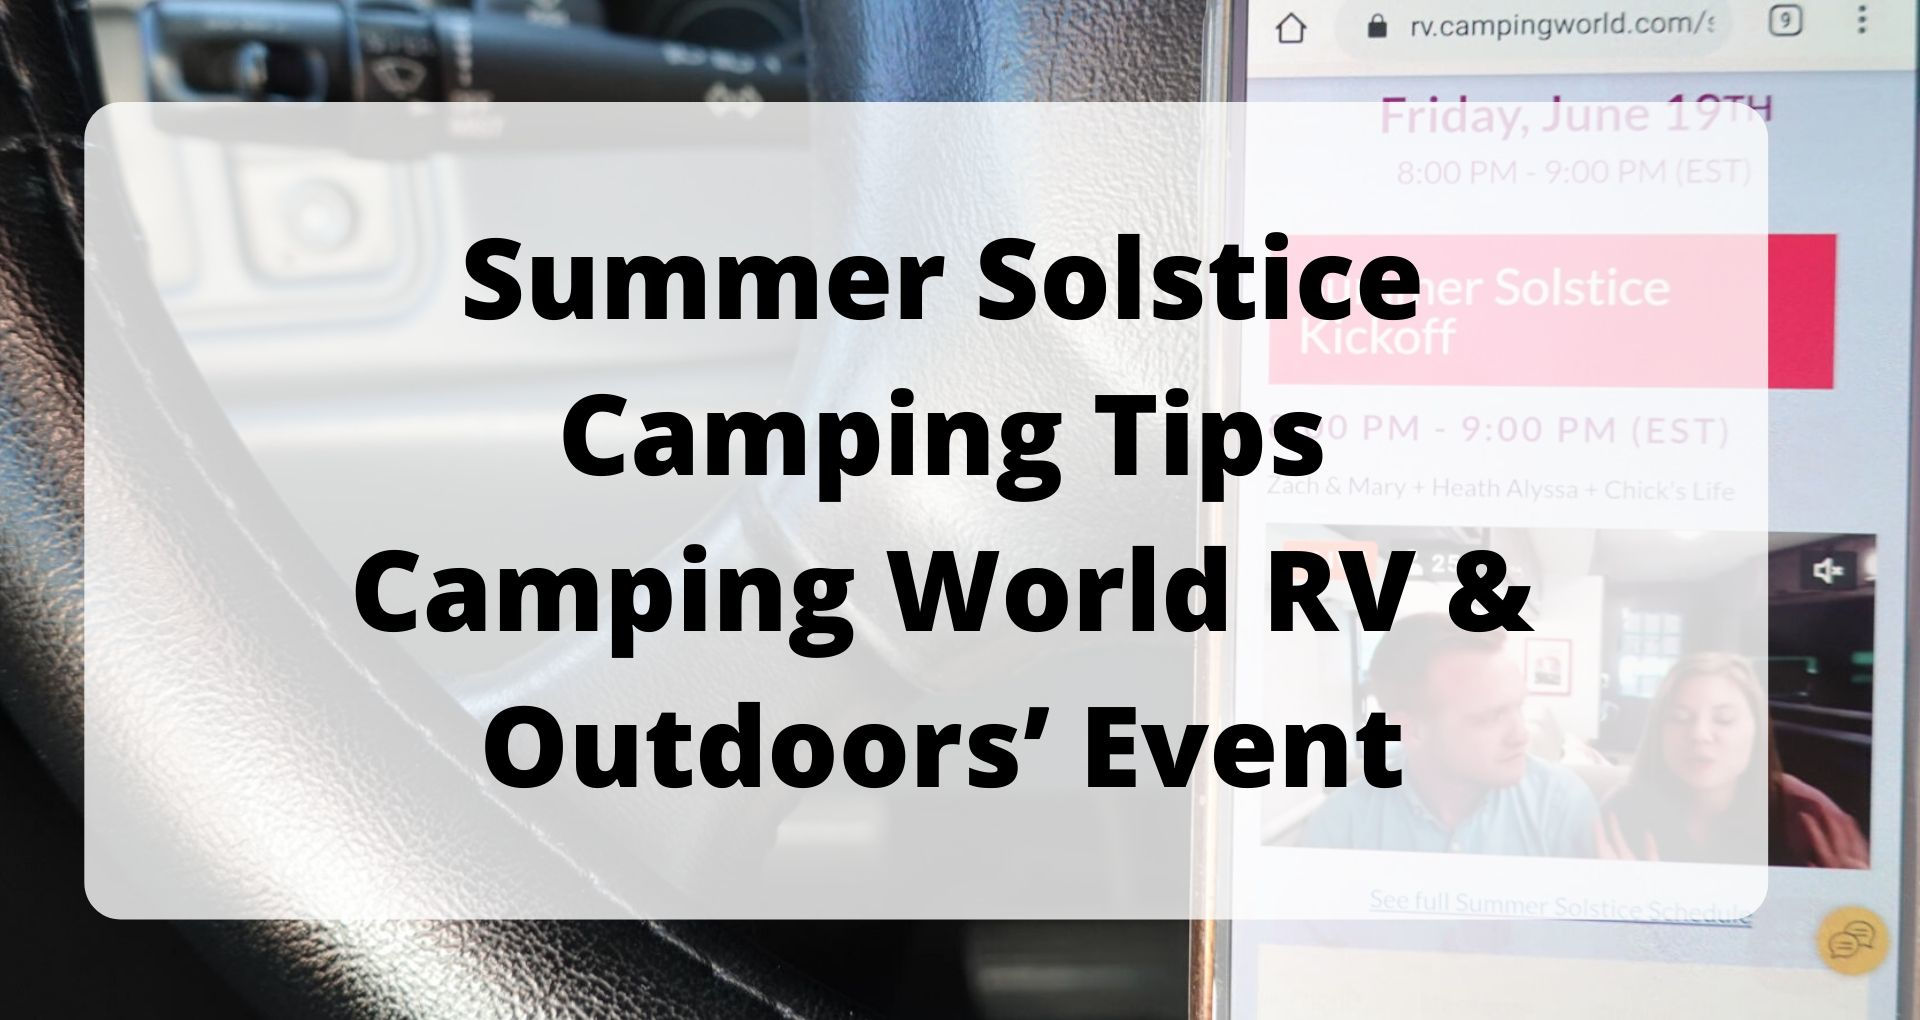 Summer Solstice Camping Tips Camping World RV & Outdoors’ Event